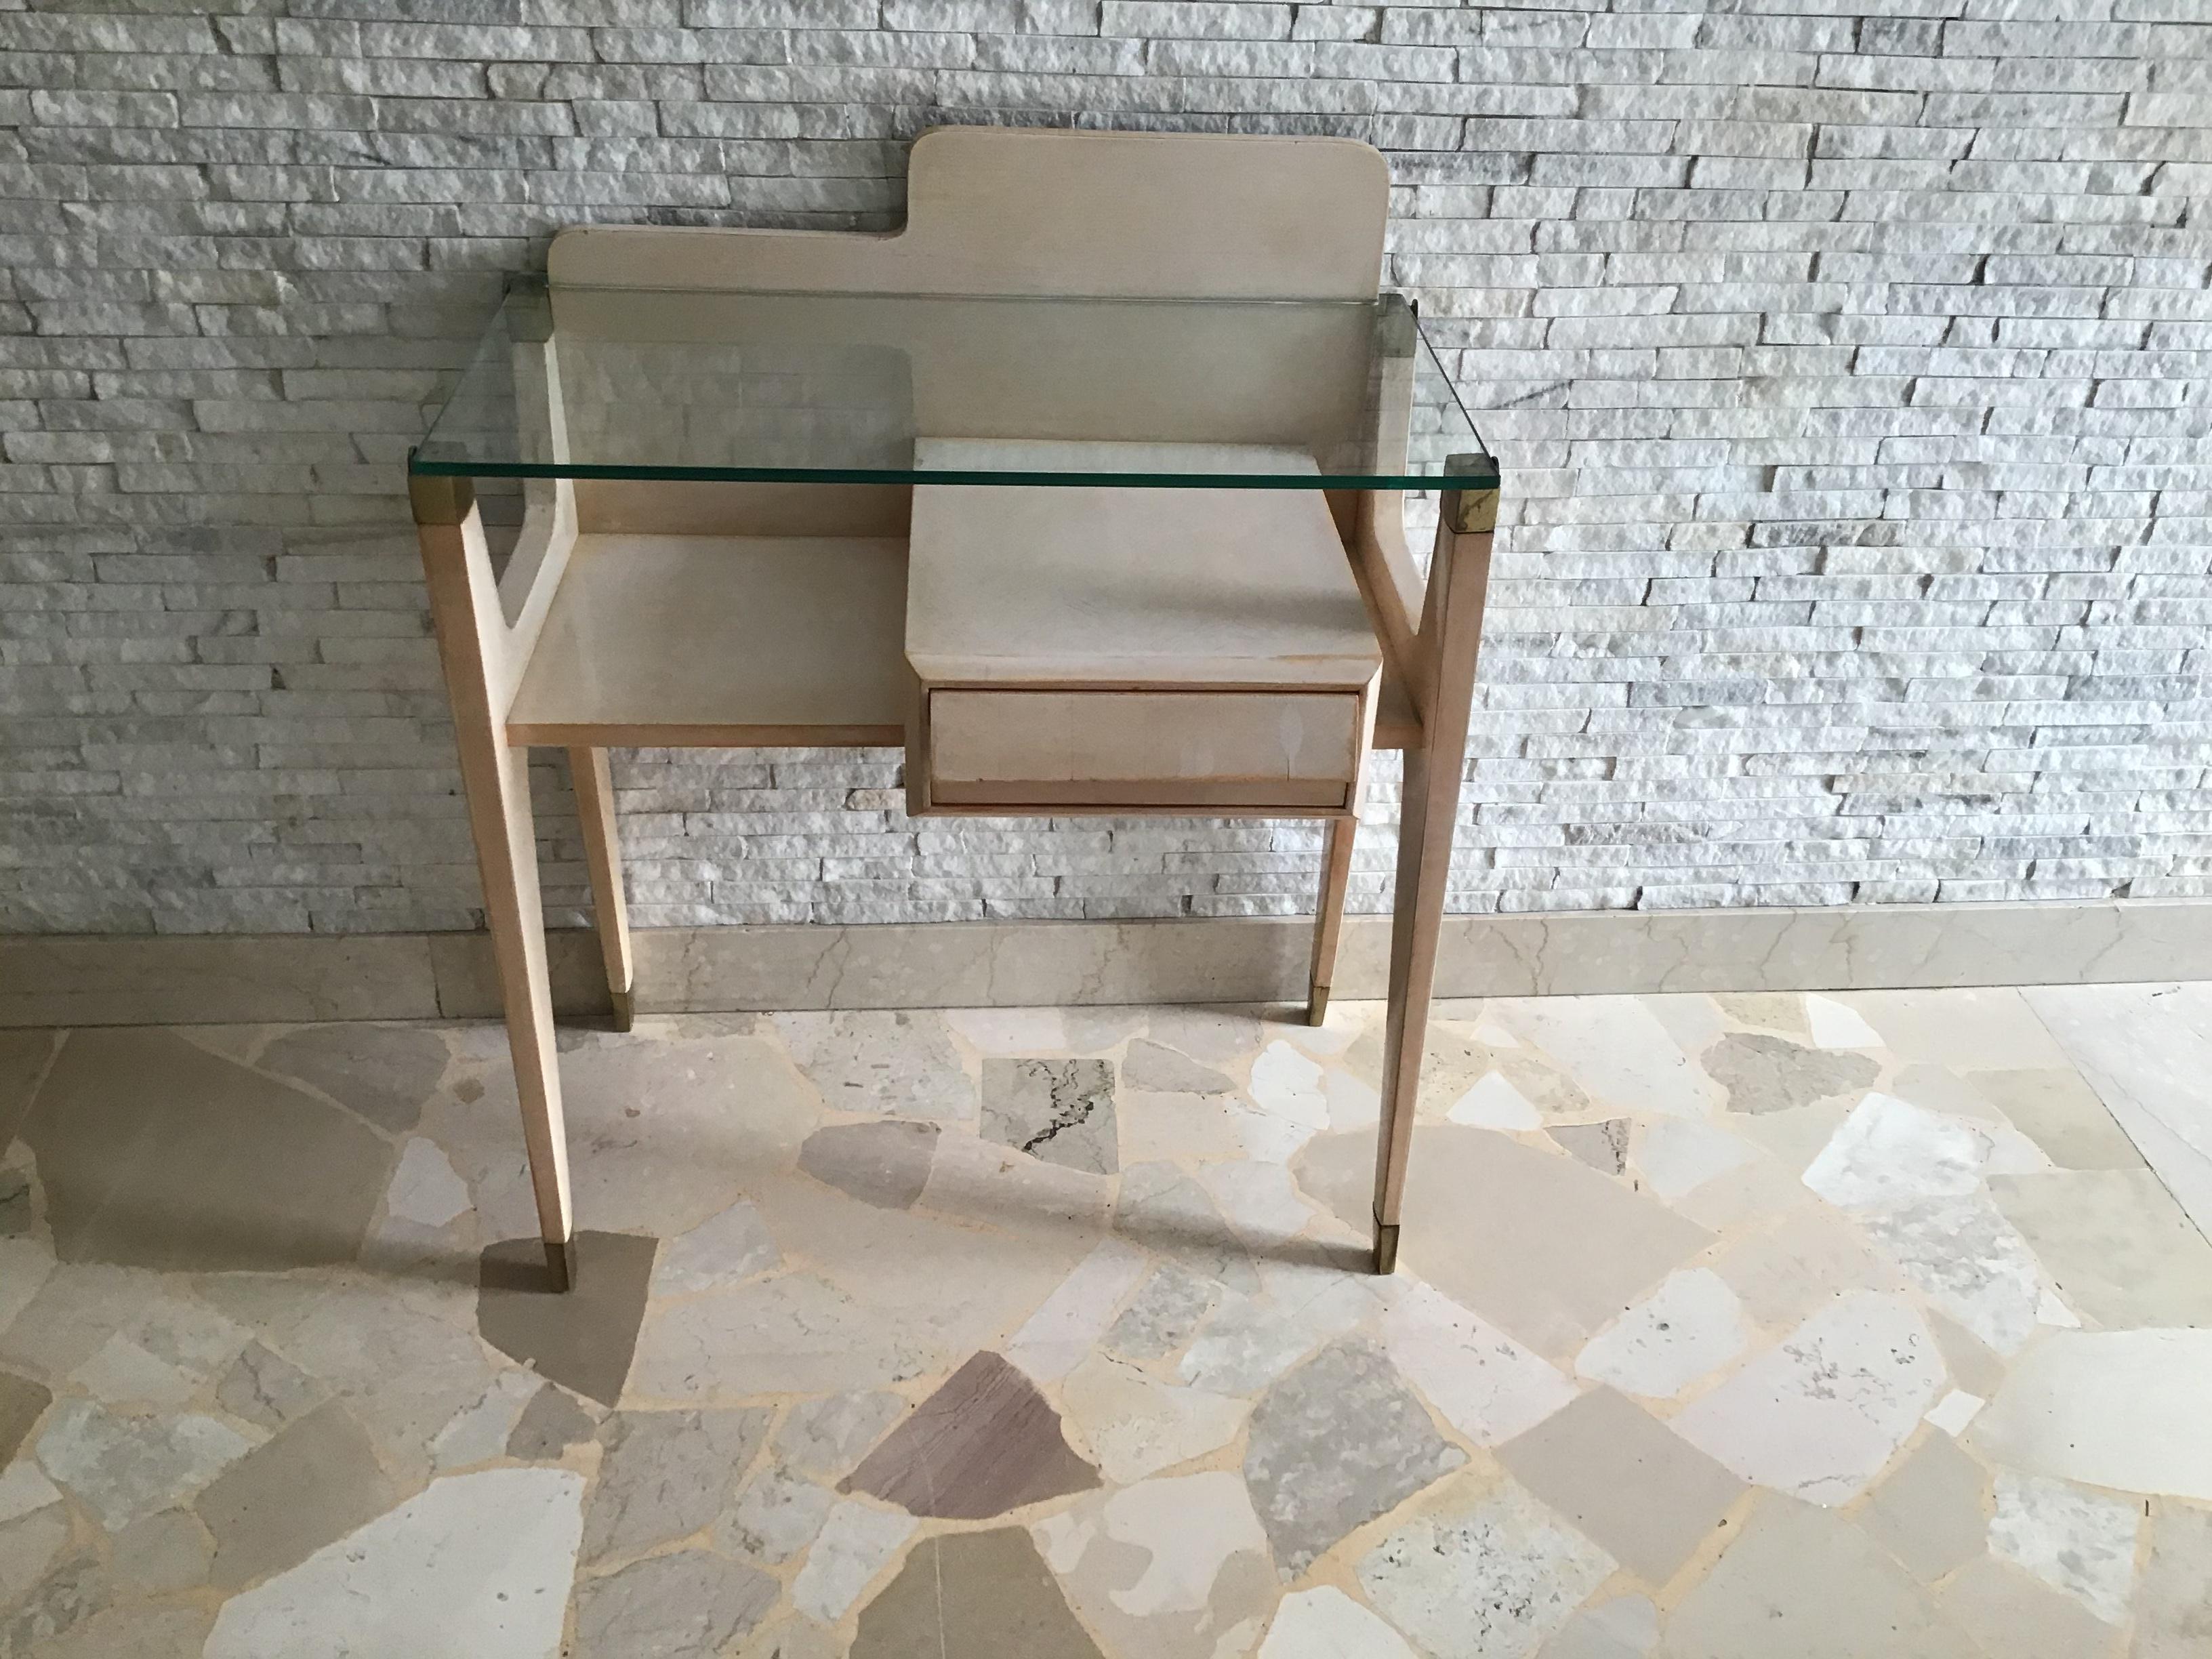 Gio ‘ Ponti “Stile “ bedside tables brass wood glass 1950 Italy.